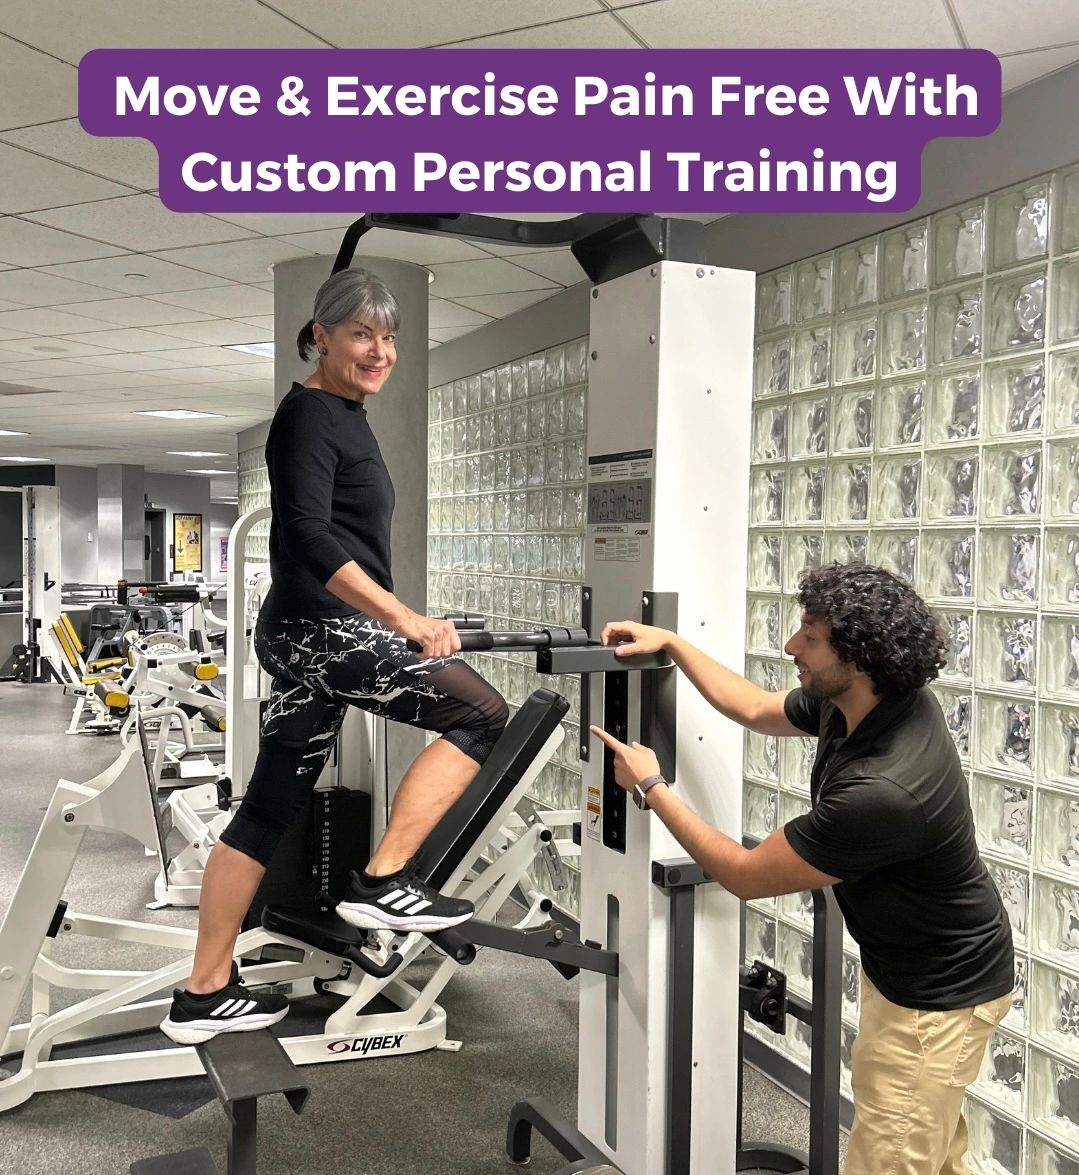 Personal Training, Move Pain Free